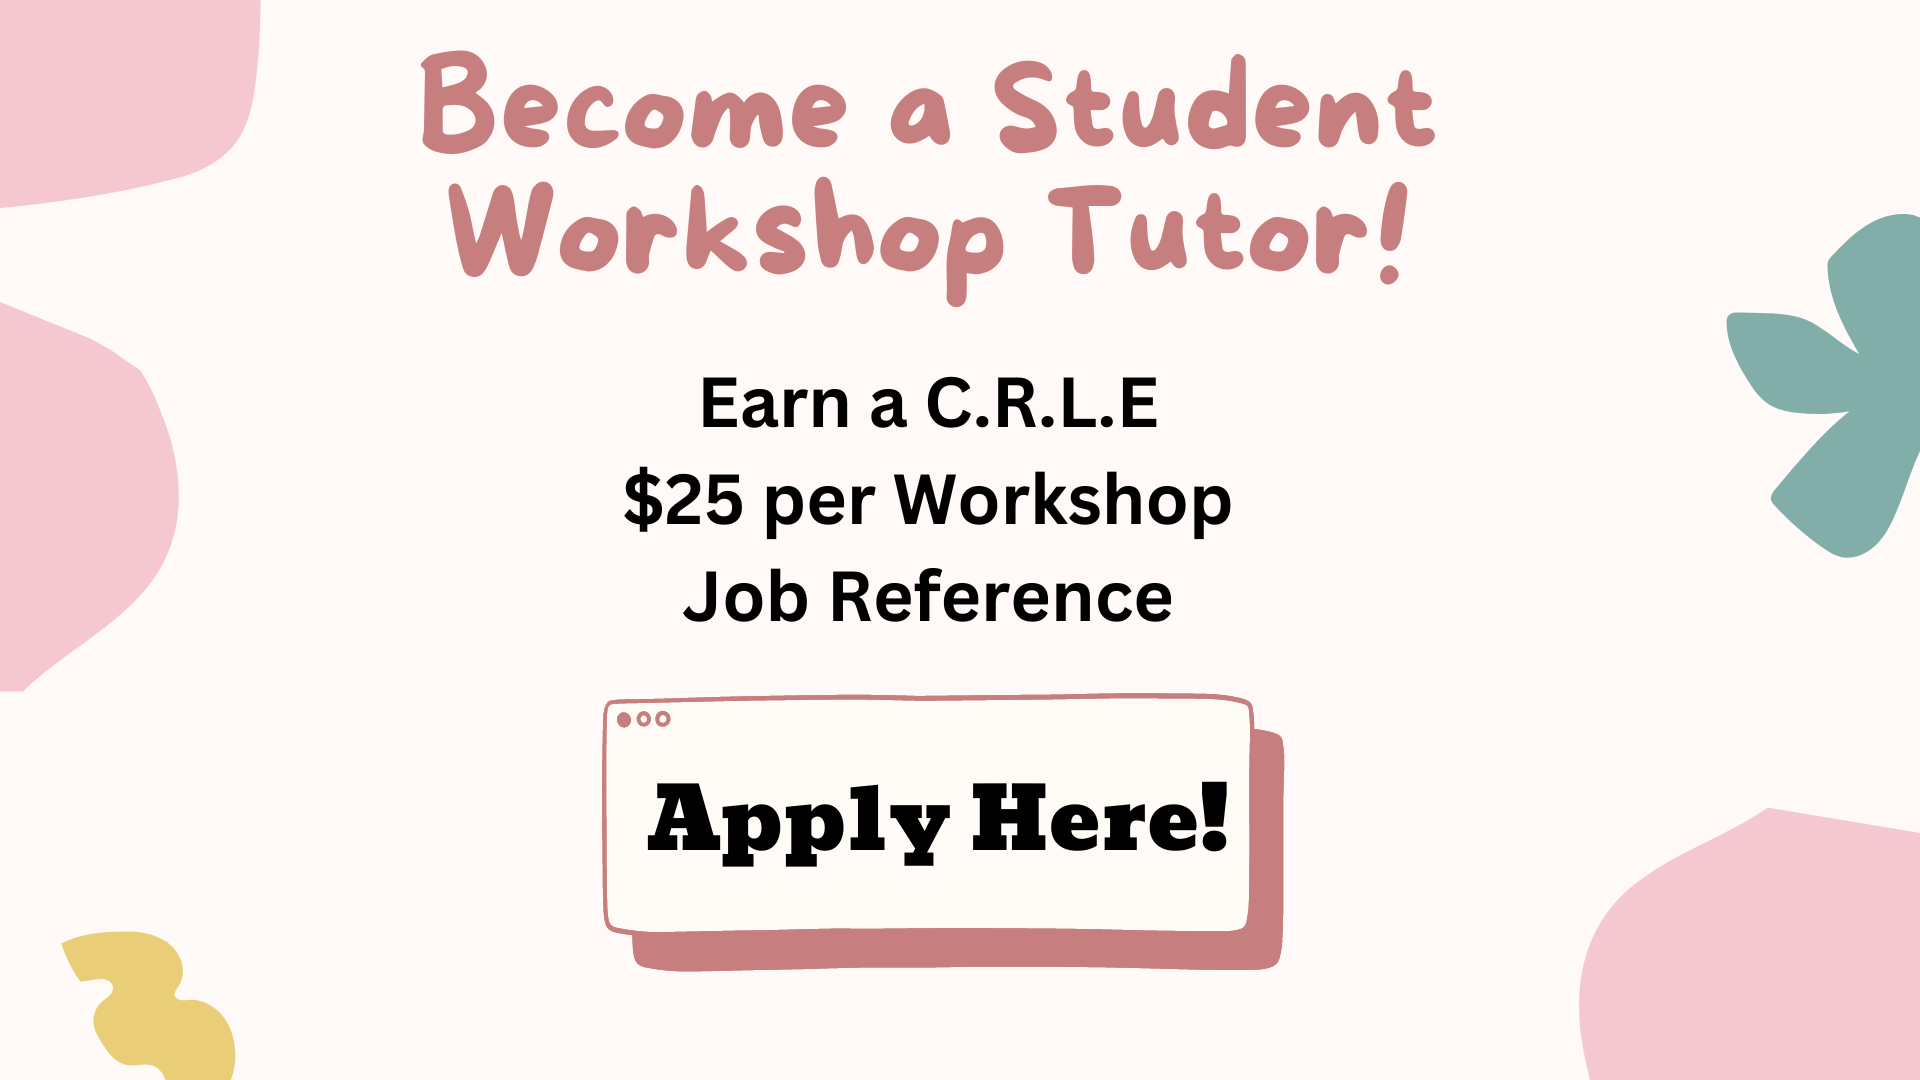 Become a Student Tutor!